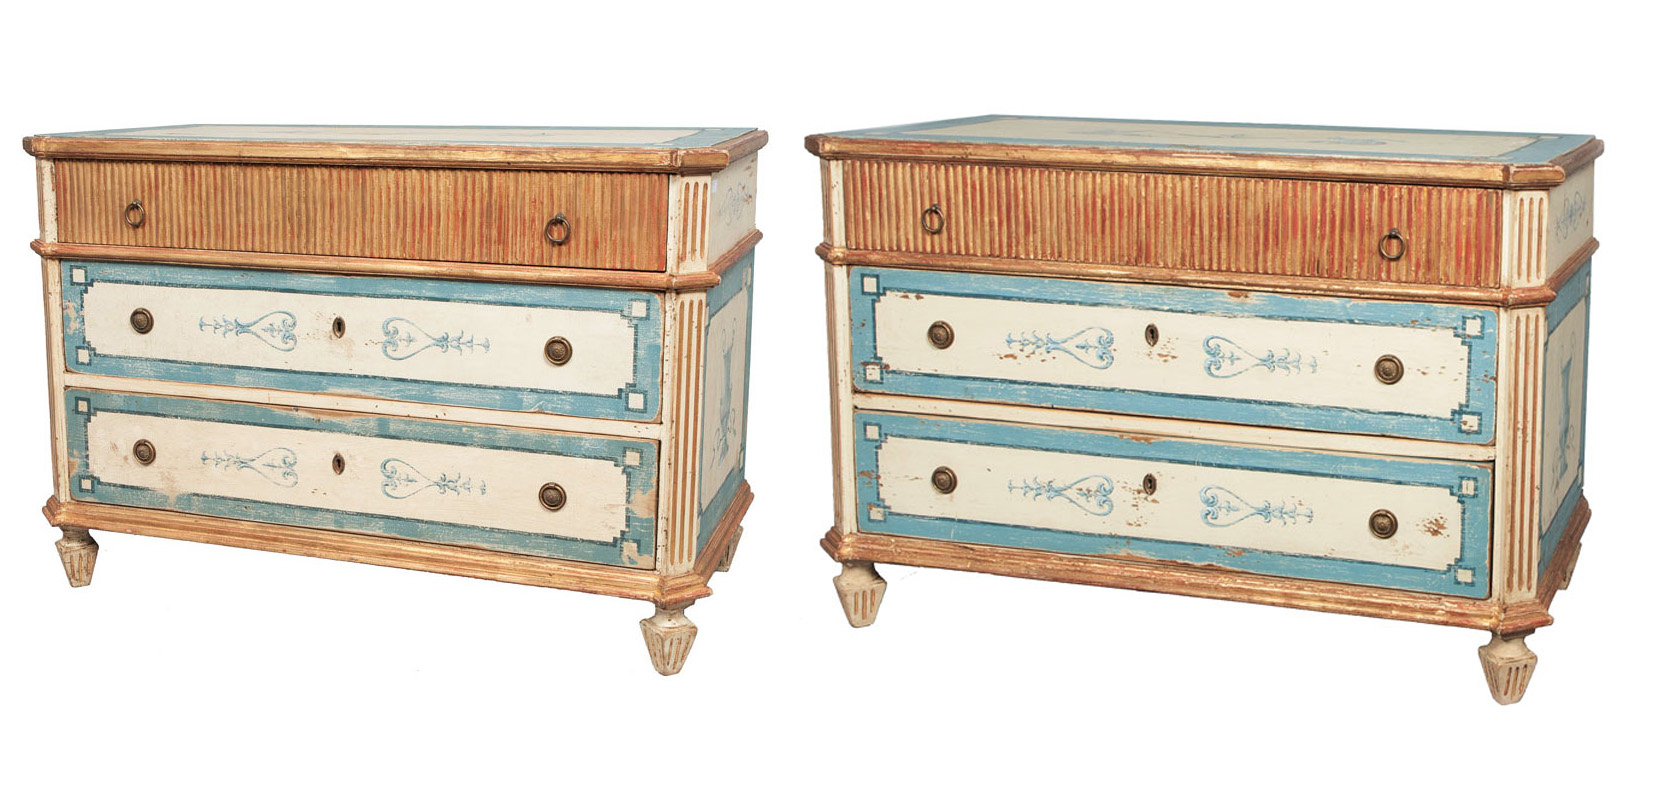 A pair of coloured commodes with antique-like painting